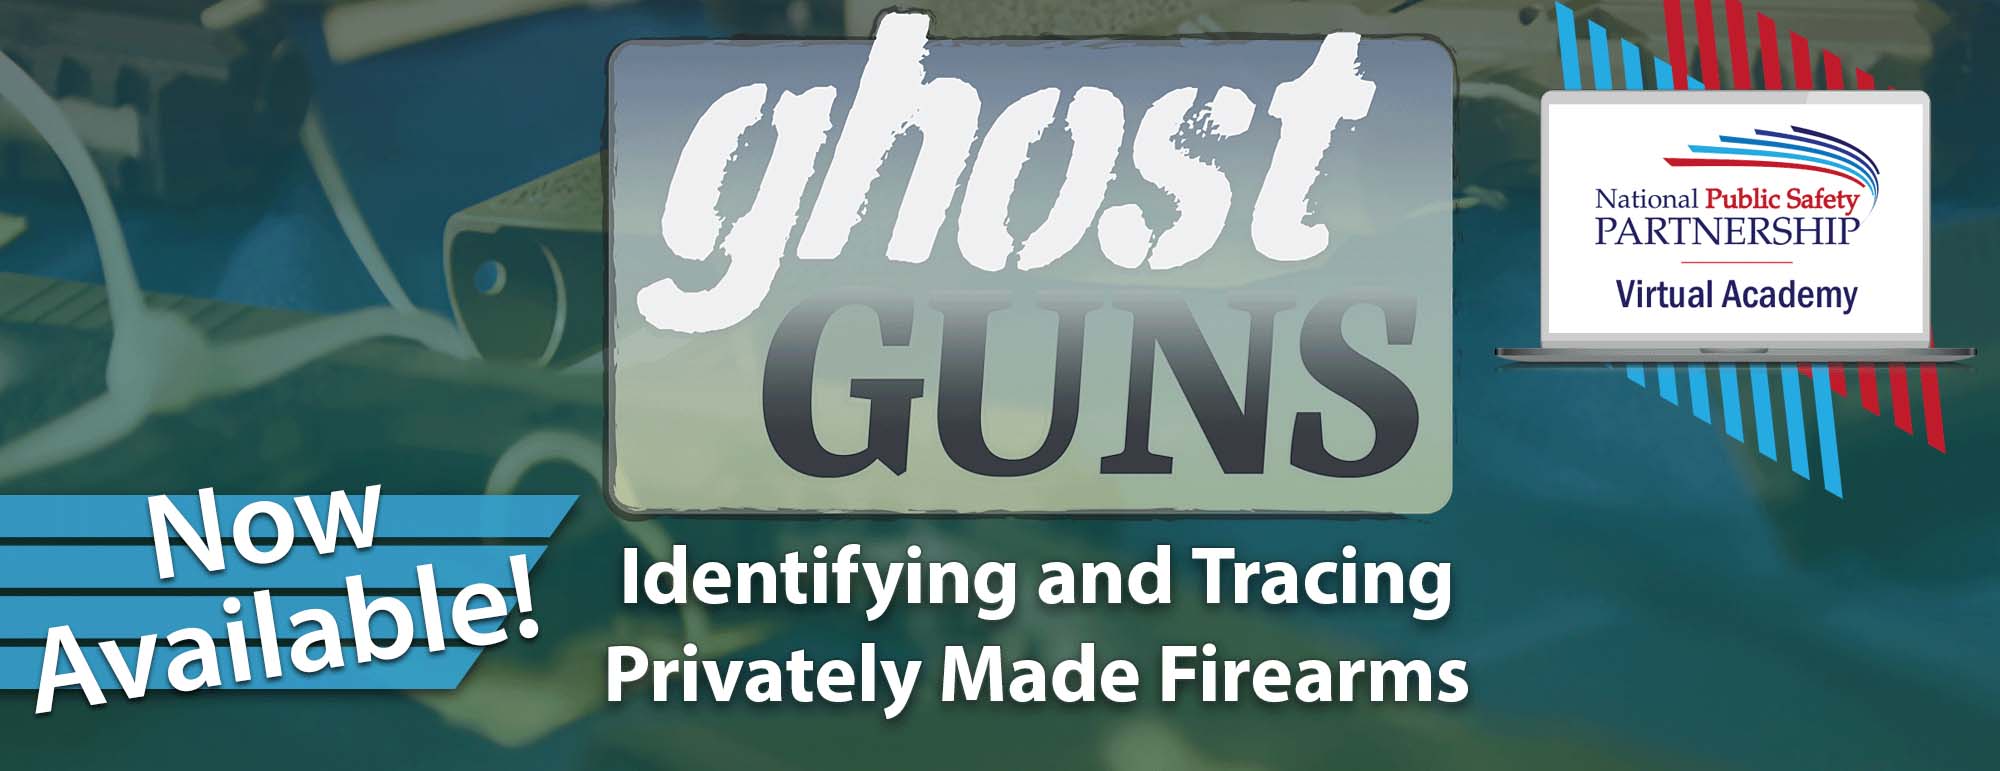 Now available! National Public Safety Partnership Virtual Academy. Ghost Guns. Identifying and Tracing Privately Made Fireamrs.